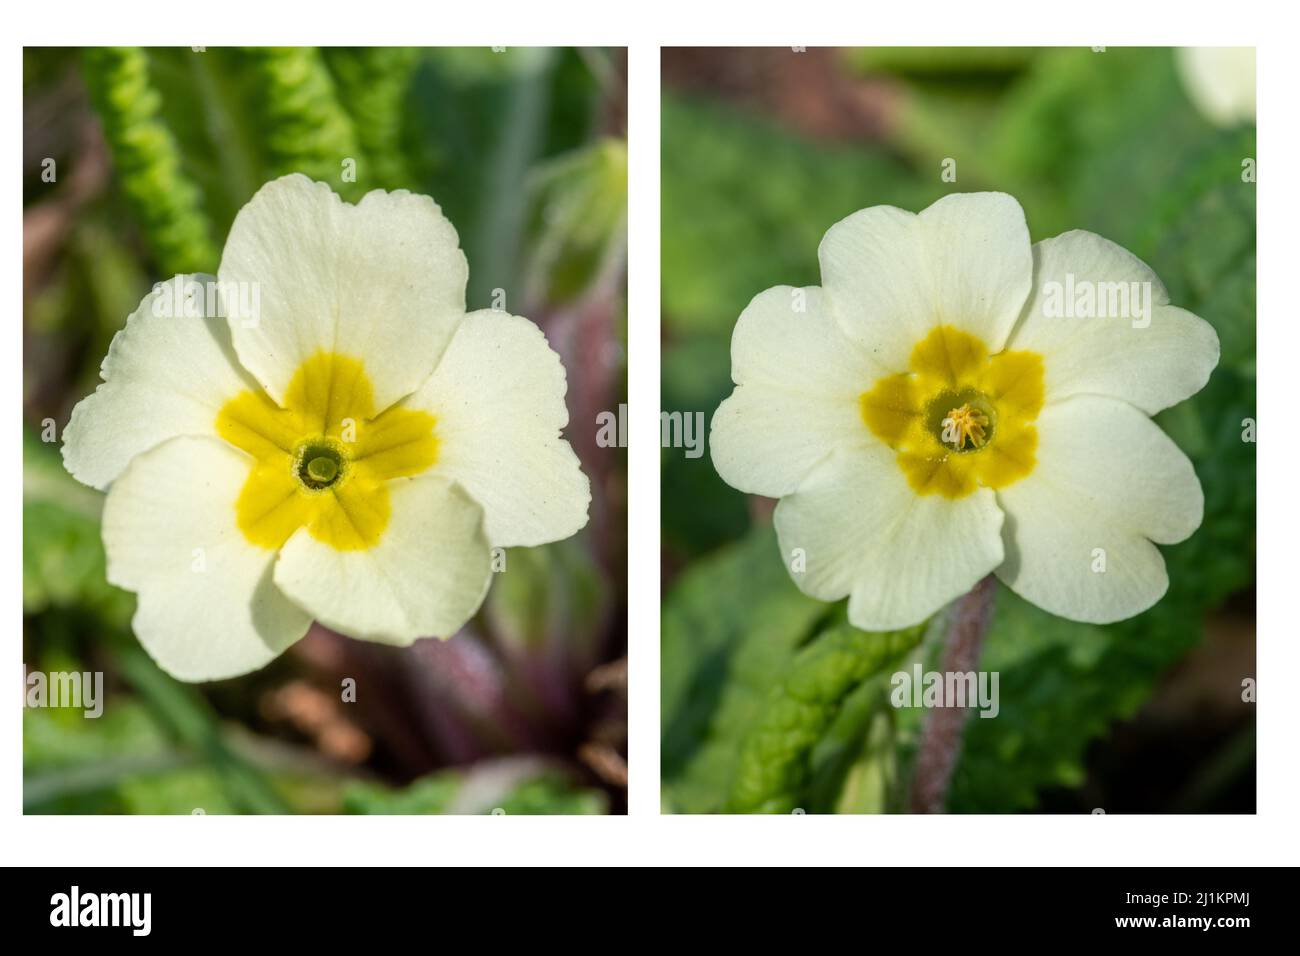 Primrose (Primula vulgaris), a spring wildflower, UK. Close-up of the two flower types, pin-eyed (left) and thrum-eyed (right) flowers. Stock Photo